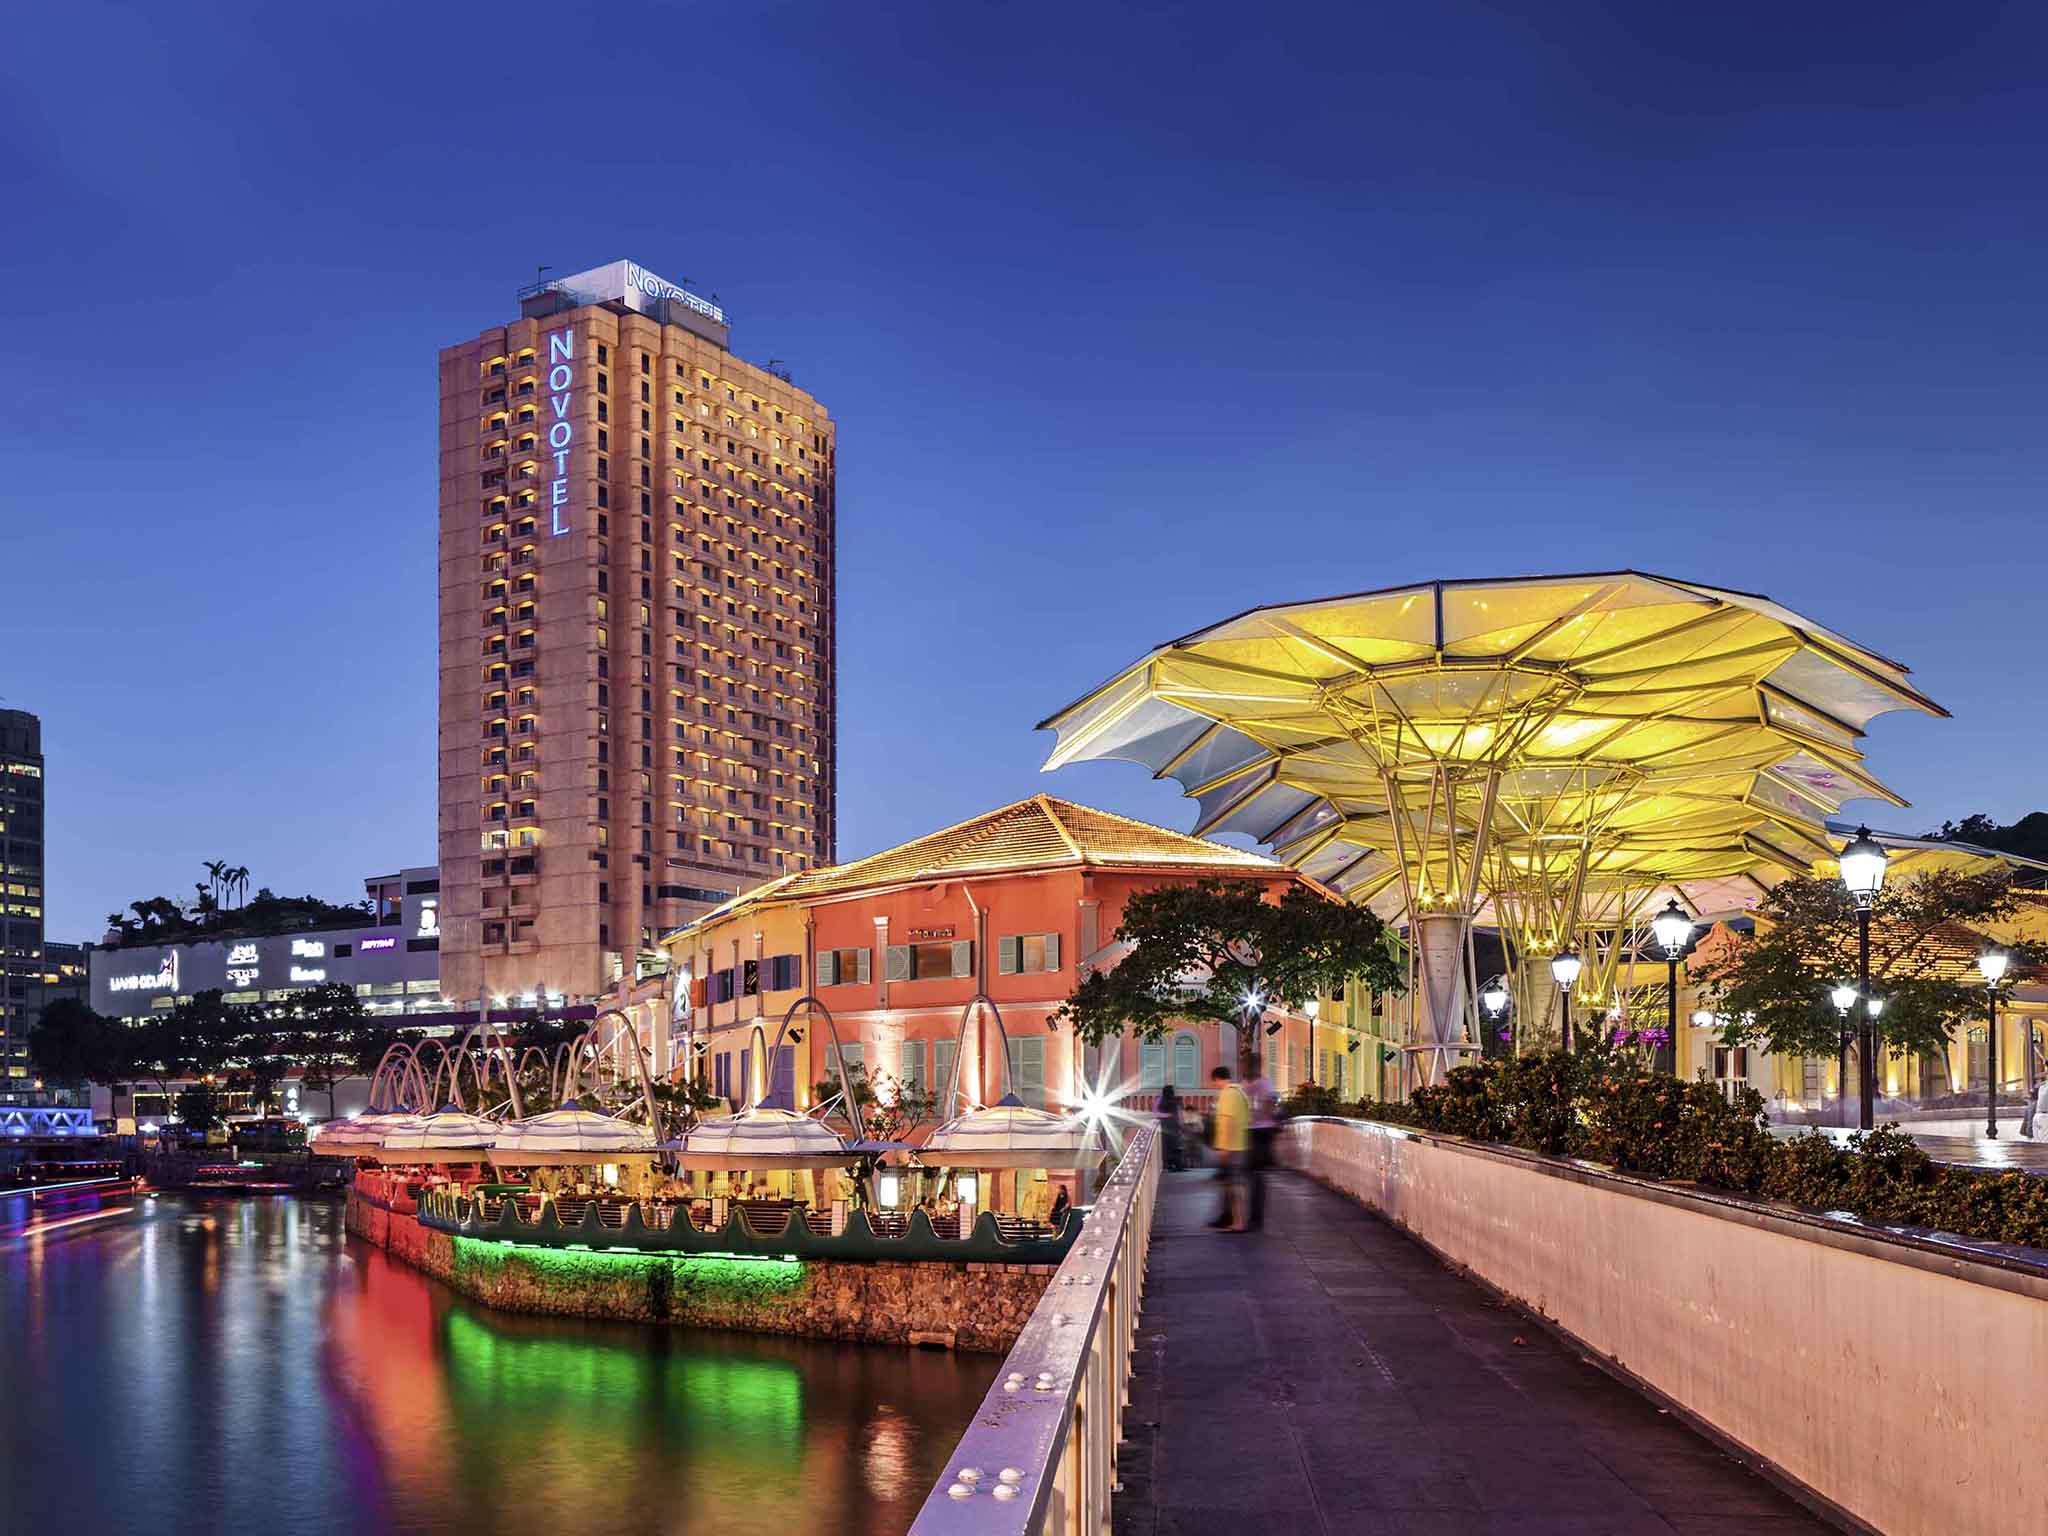 Singapores new hotel supply growth is forecast to slow down between 2018 and 2019 despite the growing number of tourists to